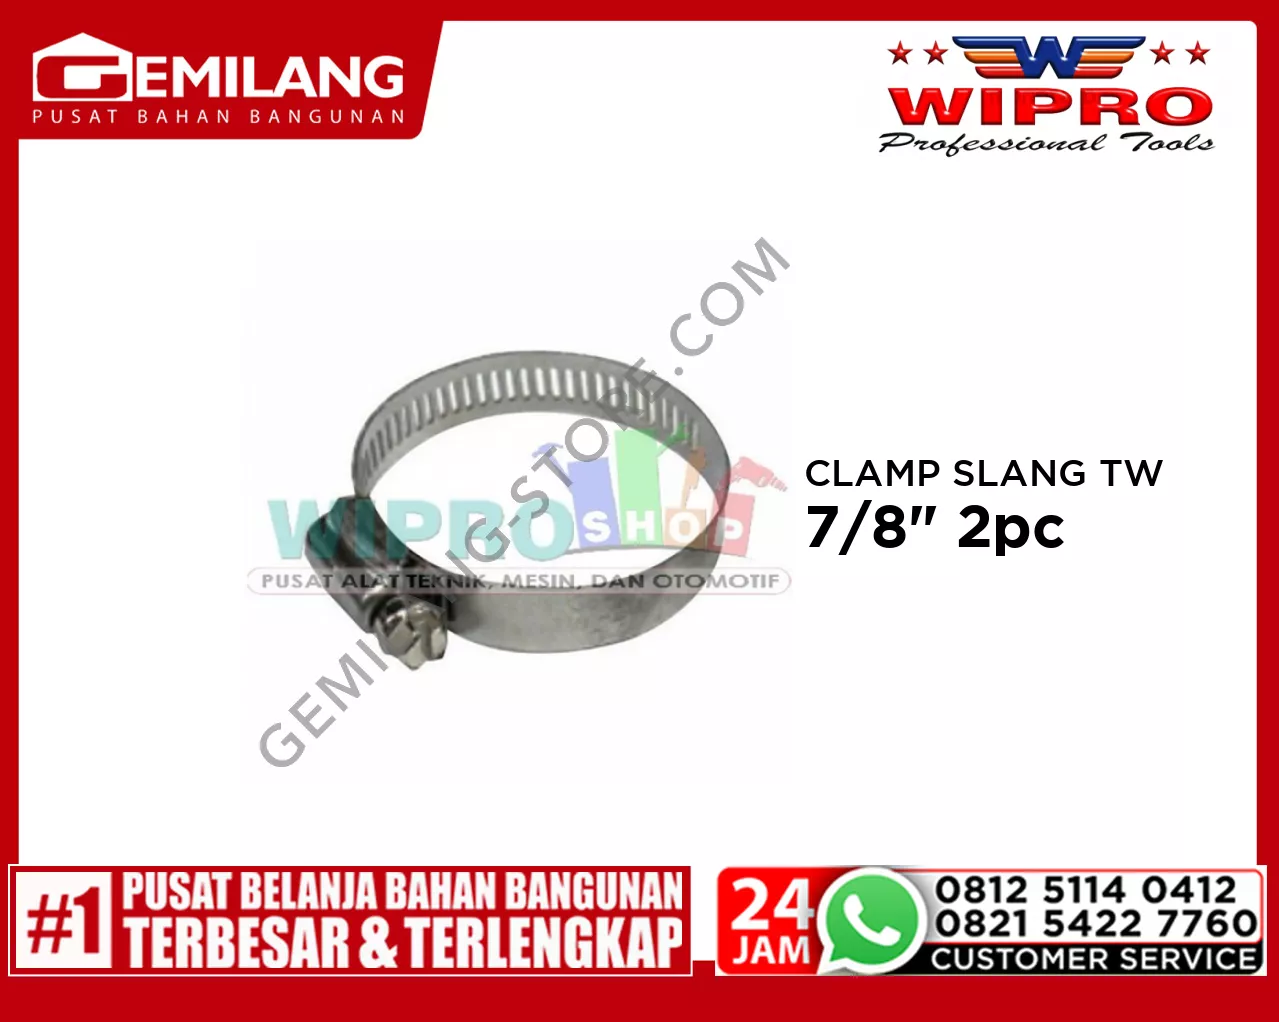 WIPRO CLAMP SLANG TW 7/8inch 2pc